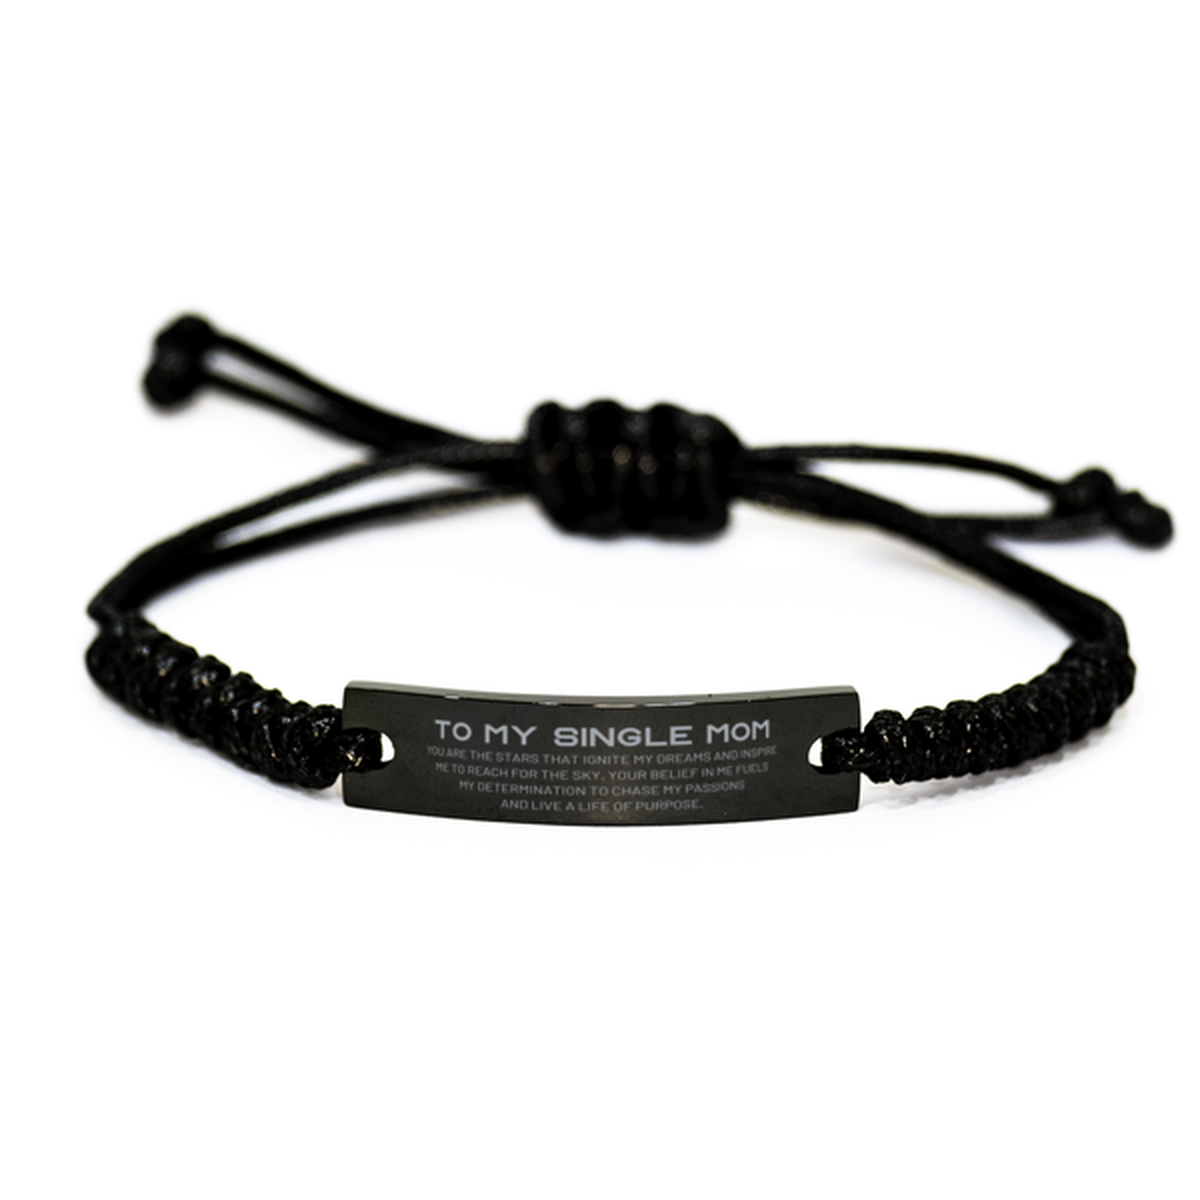 To My Single Mom Black Rope Bracelet, You are the stars that ignite my dreams and inspire me to reach for the sky, Birthday Unique Gifts For Single Mom, Thank You Gifts For Single Mom